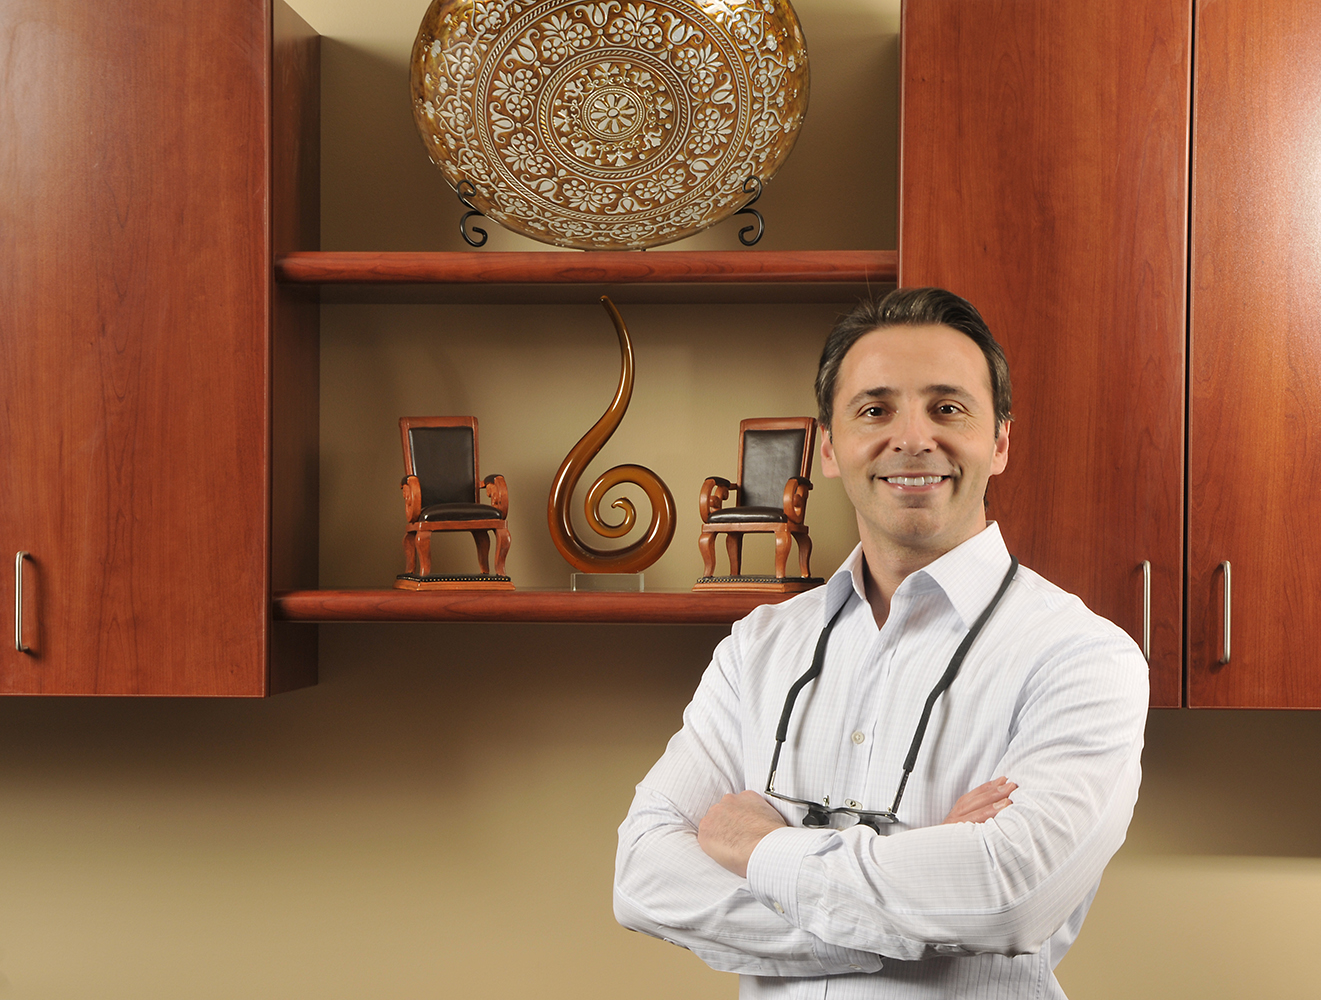 Dentist standing in front of ceramic display in front office